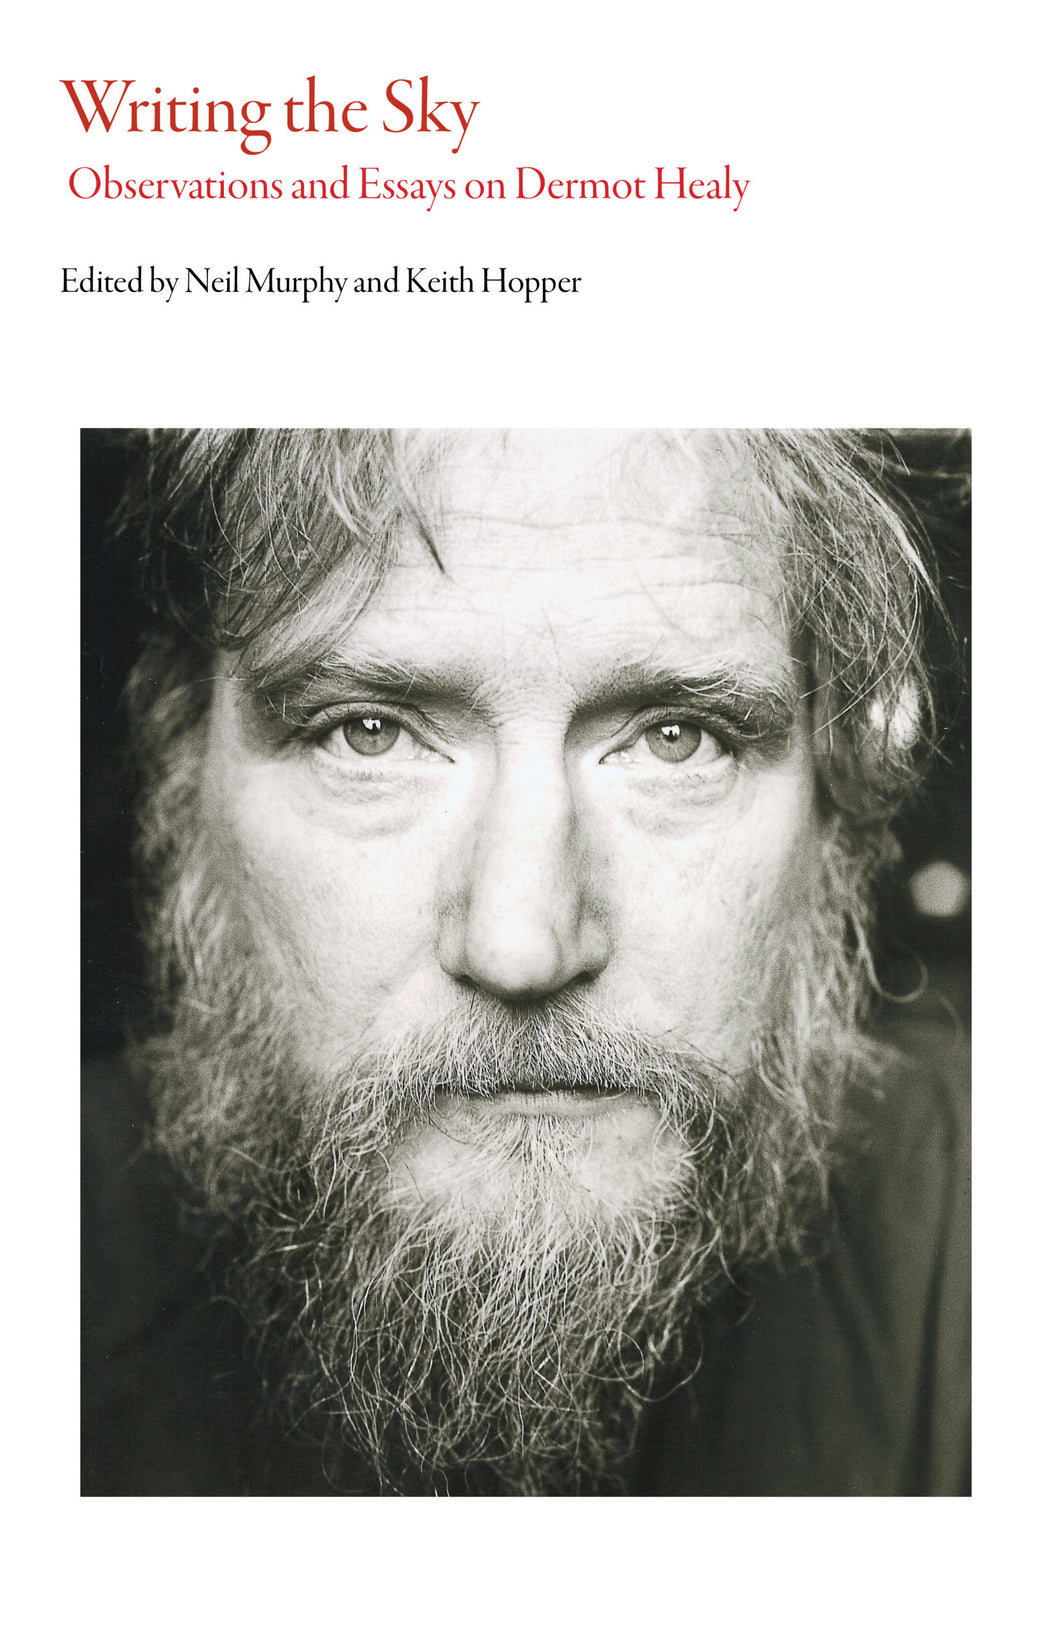 Writing the Sky: Observations and Essays on Dermot Healy